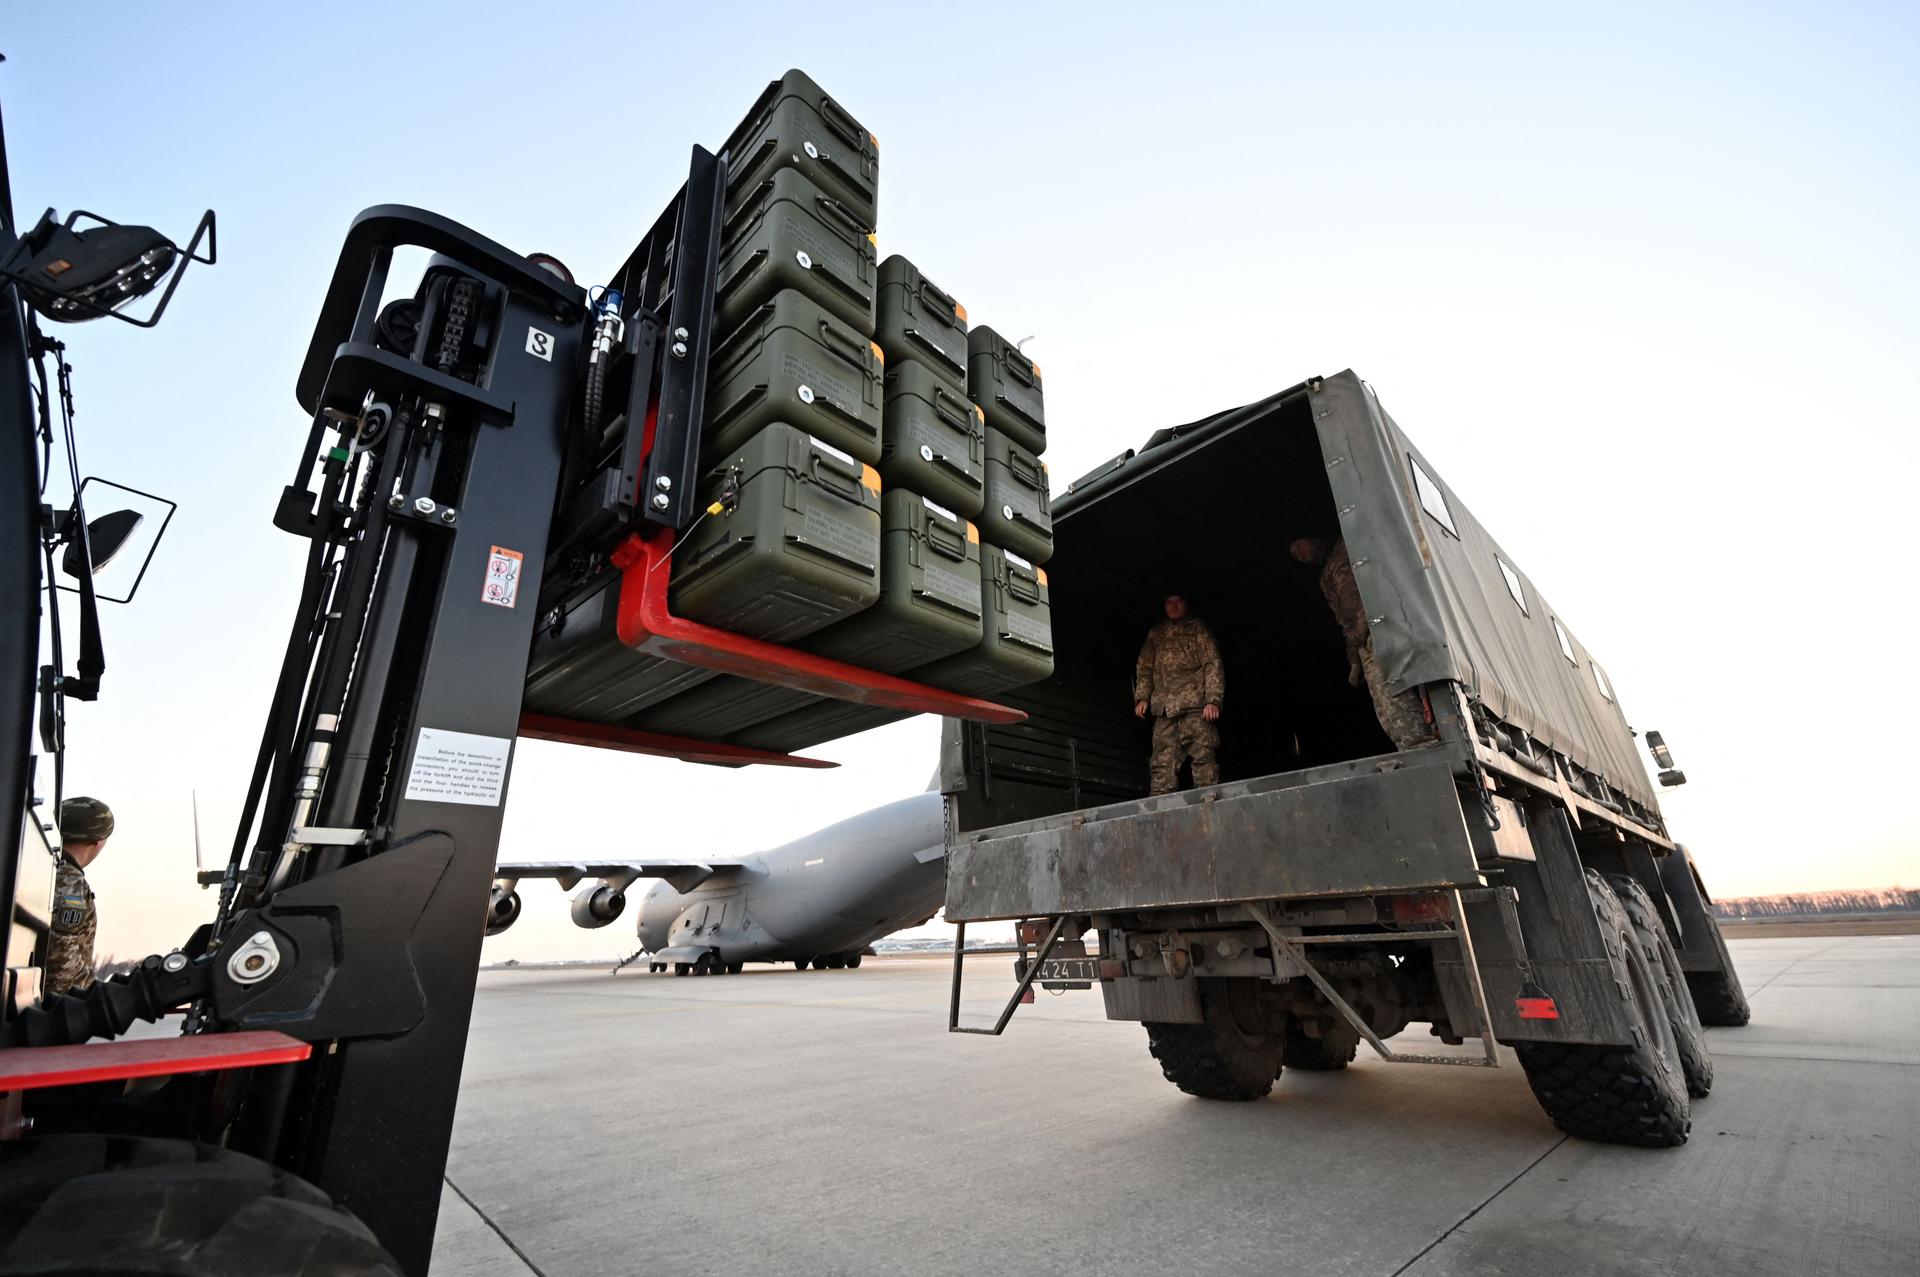 A forklift placing crates of weaponry into a military truck